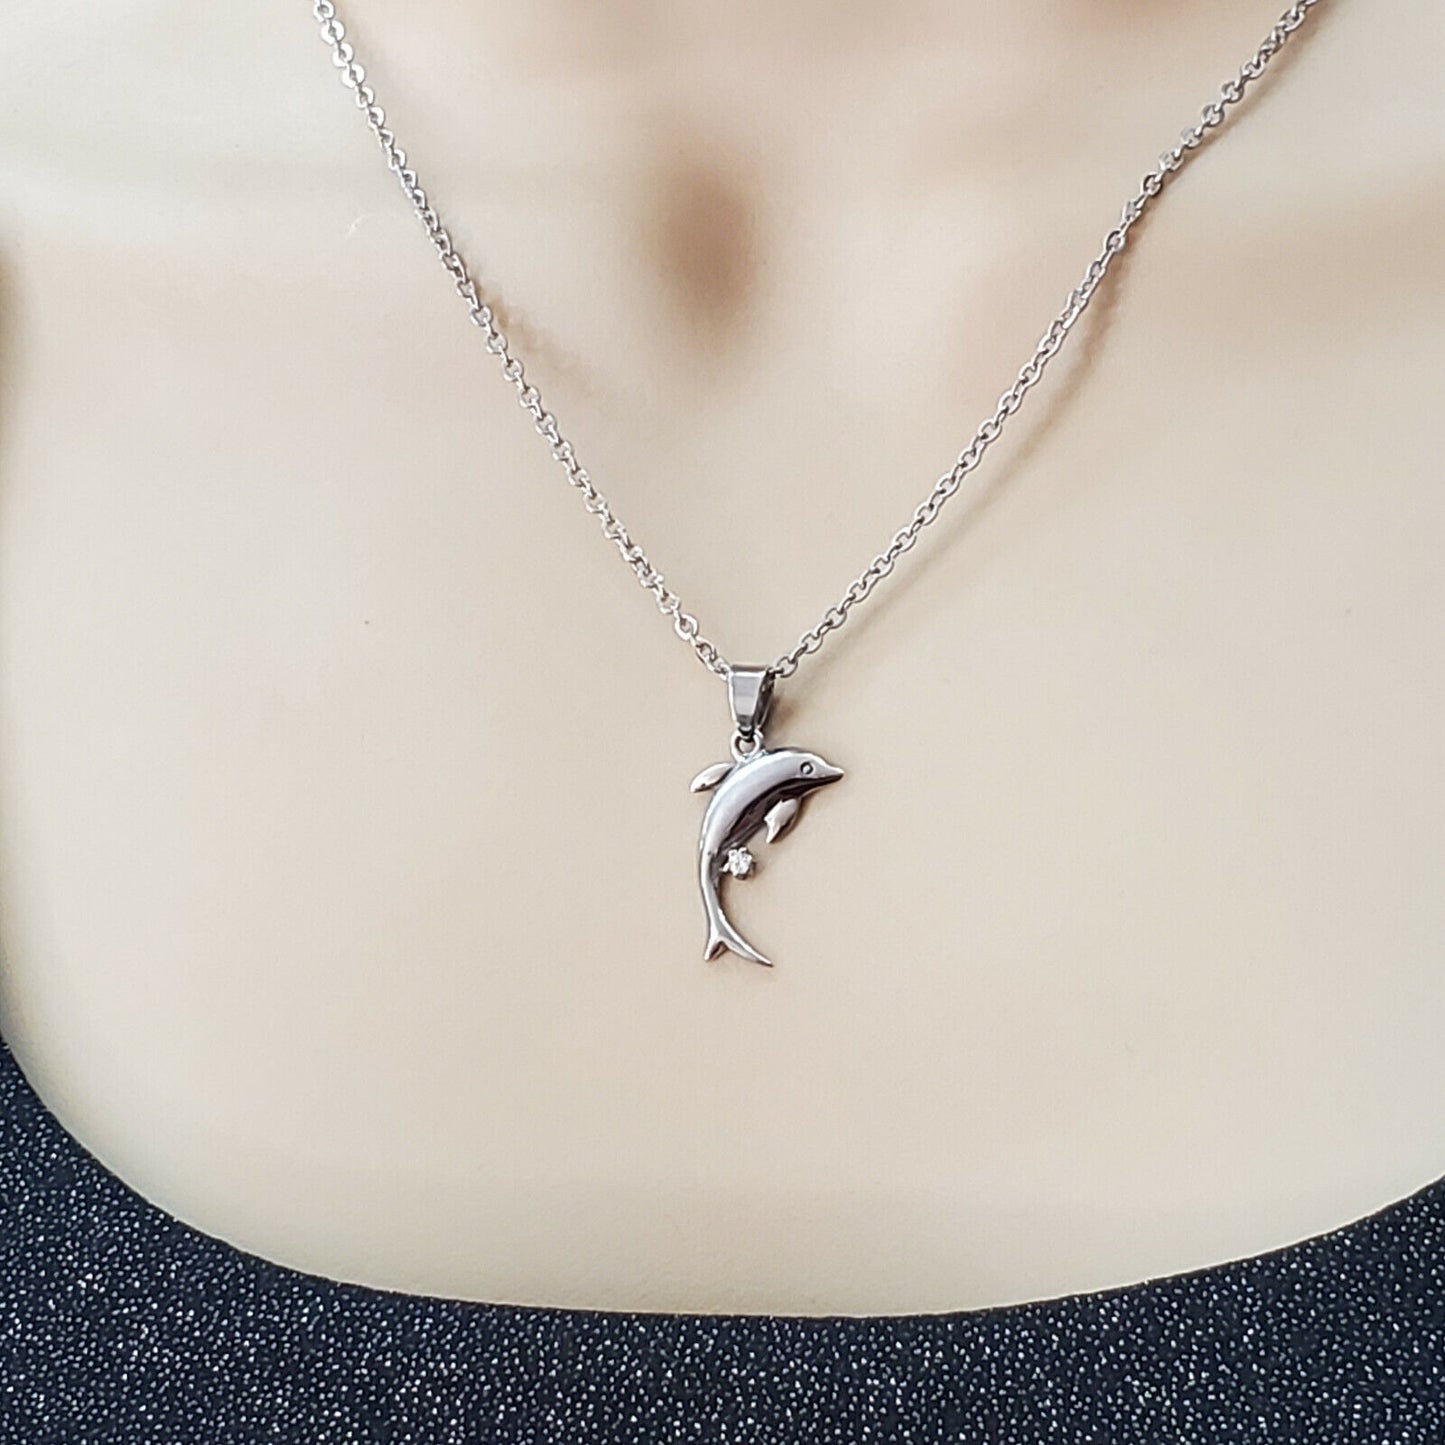 Necklaces - Stainless Steel. Dolphin Pendant & Chain.